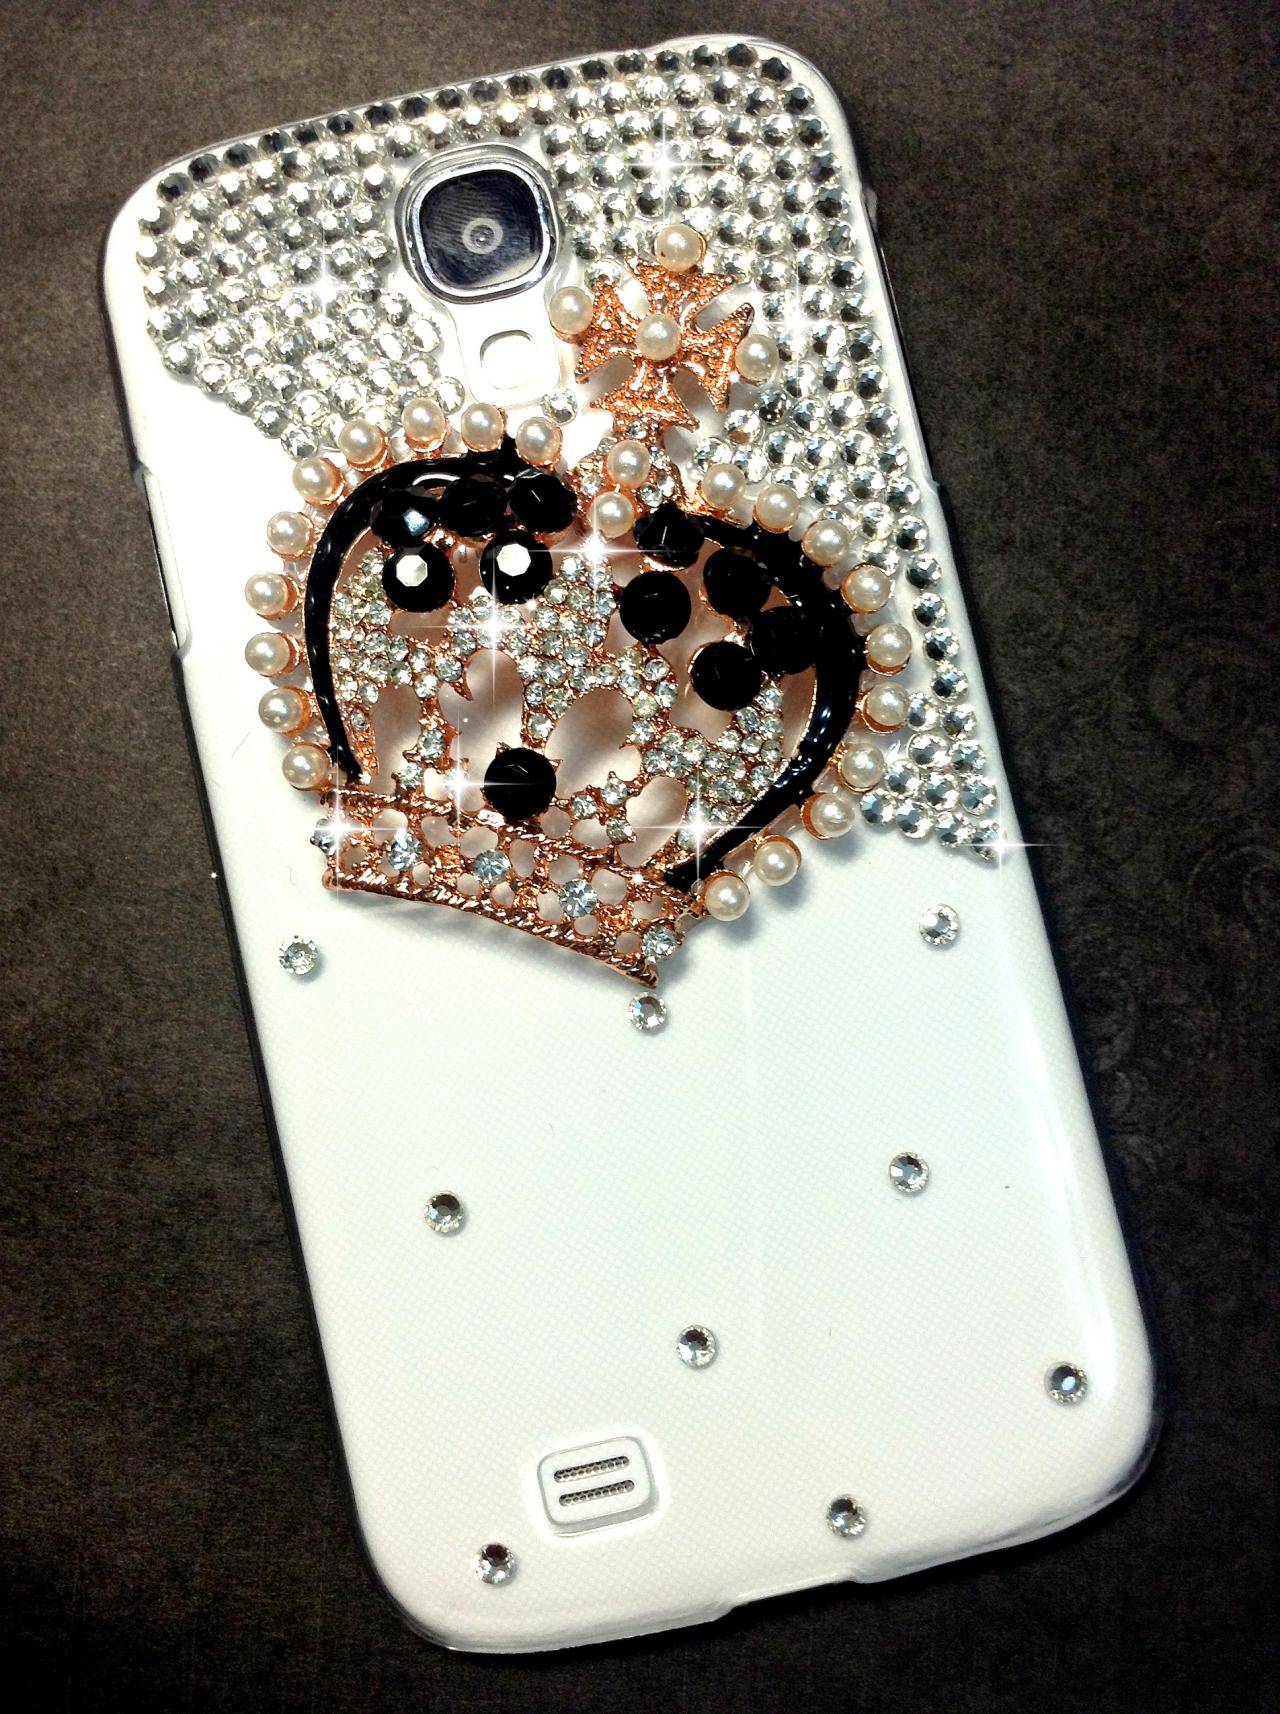 3d Handmade Crown Crystal Design Case Cover For Samsung Galaxy S 4 S4 Iv Lte I9500 I9505